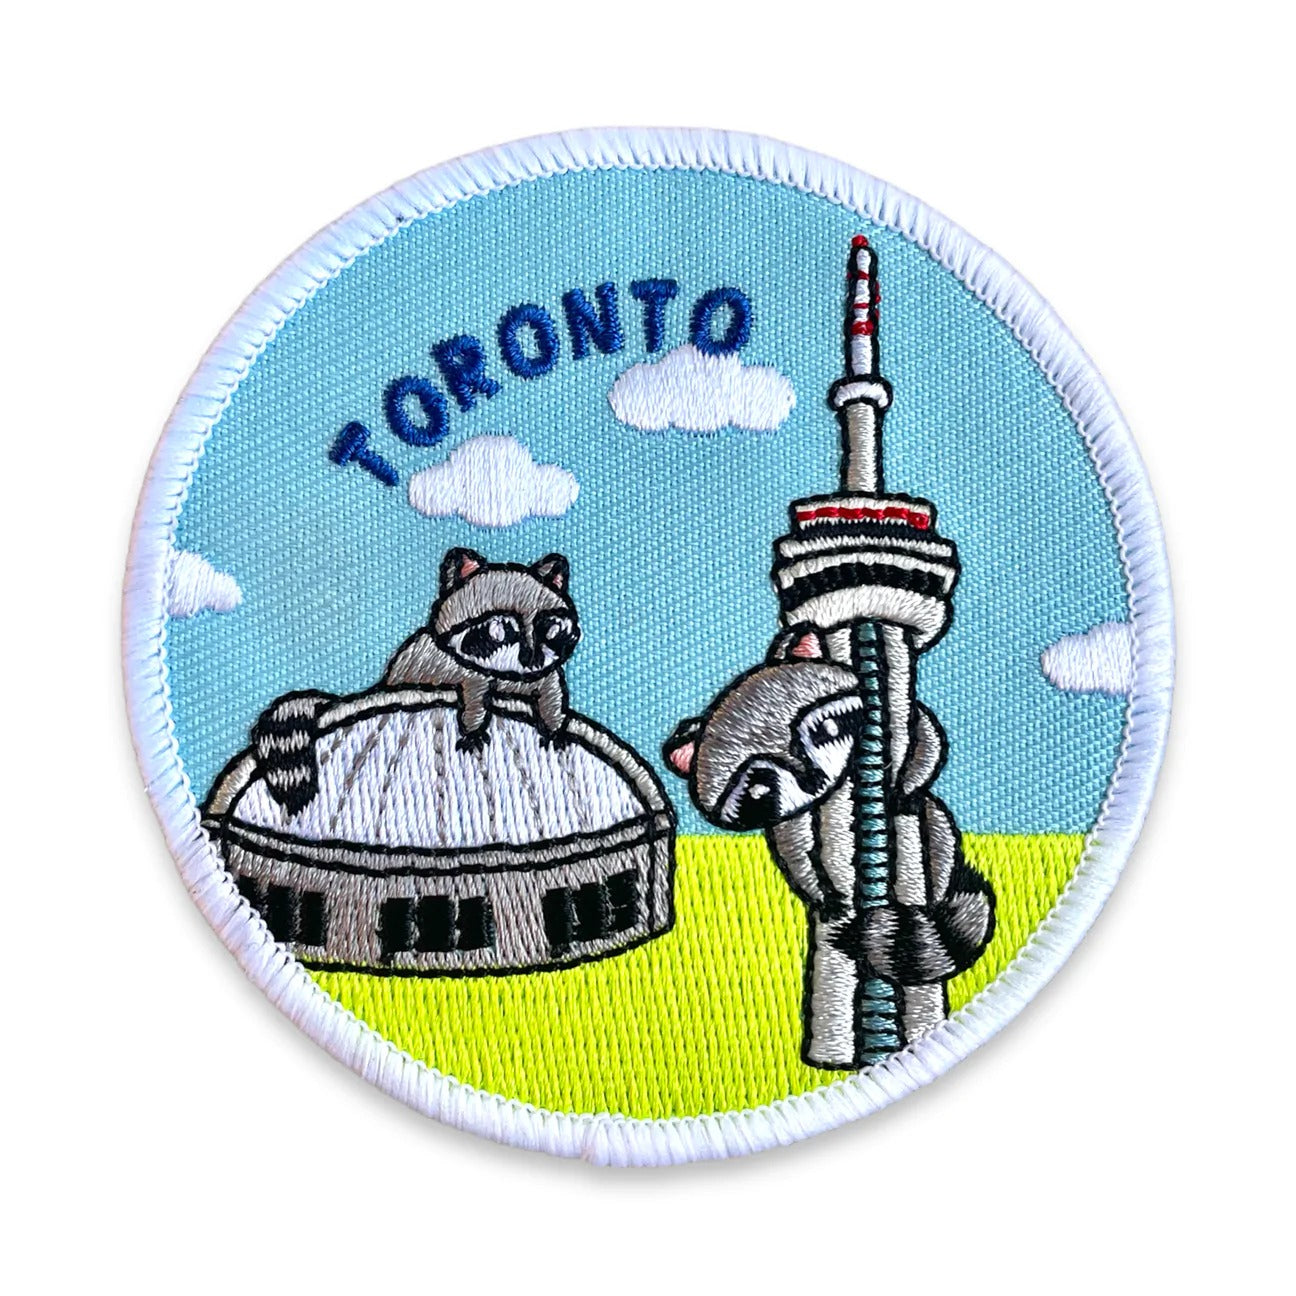 50pcs/Lot Round Luxury Embroidery Patch Letter Wing Rocket Route